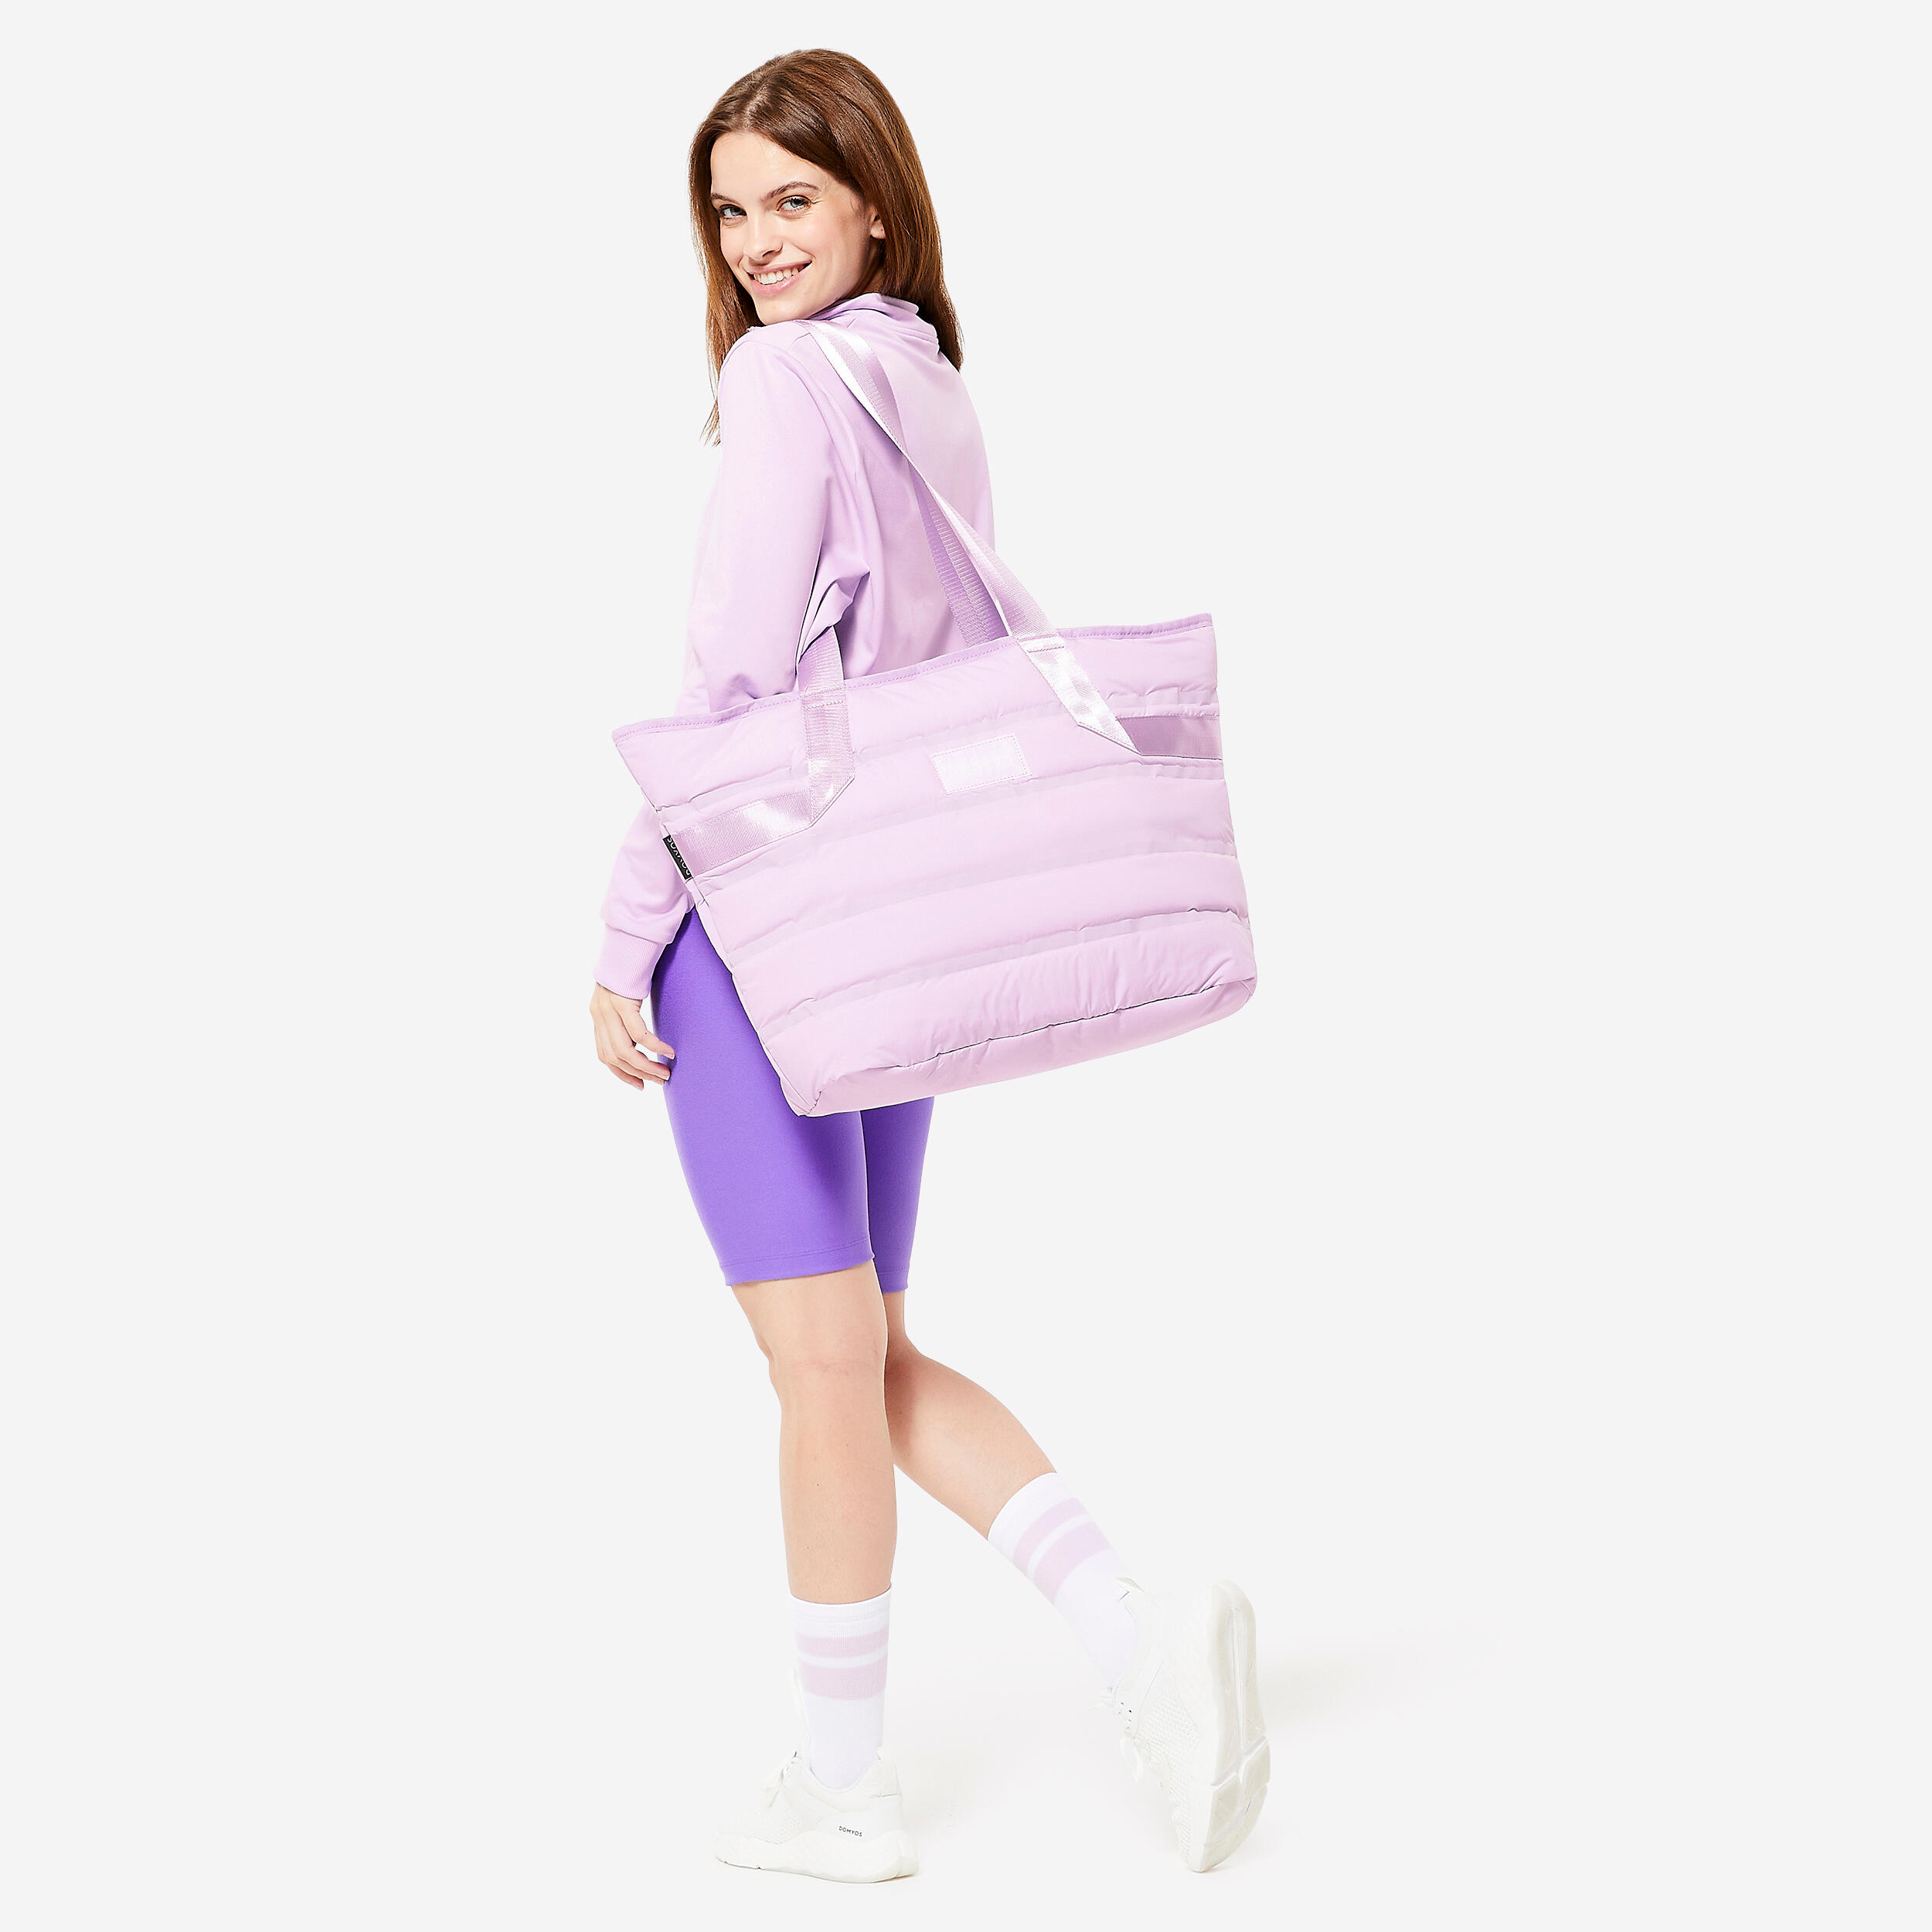 Women's 25 L Padded Fitness Training Tote Bag - Parma Violet 3/9